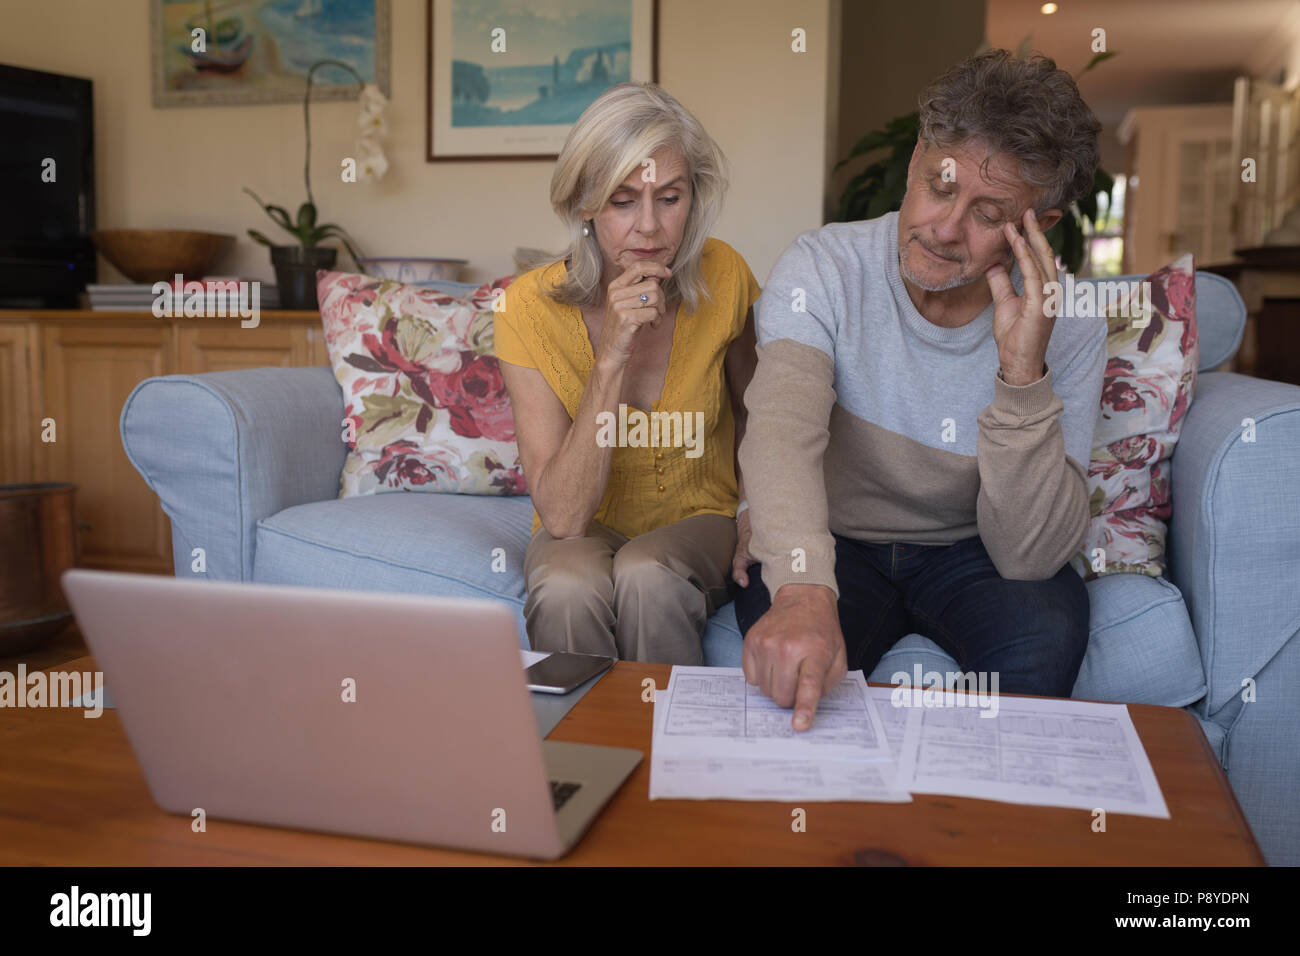 Worried senior couple discussing bills together Stock Photo